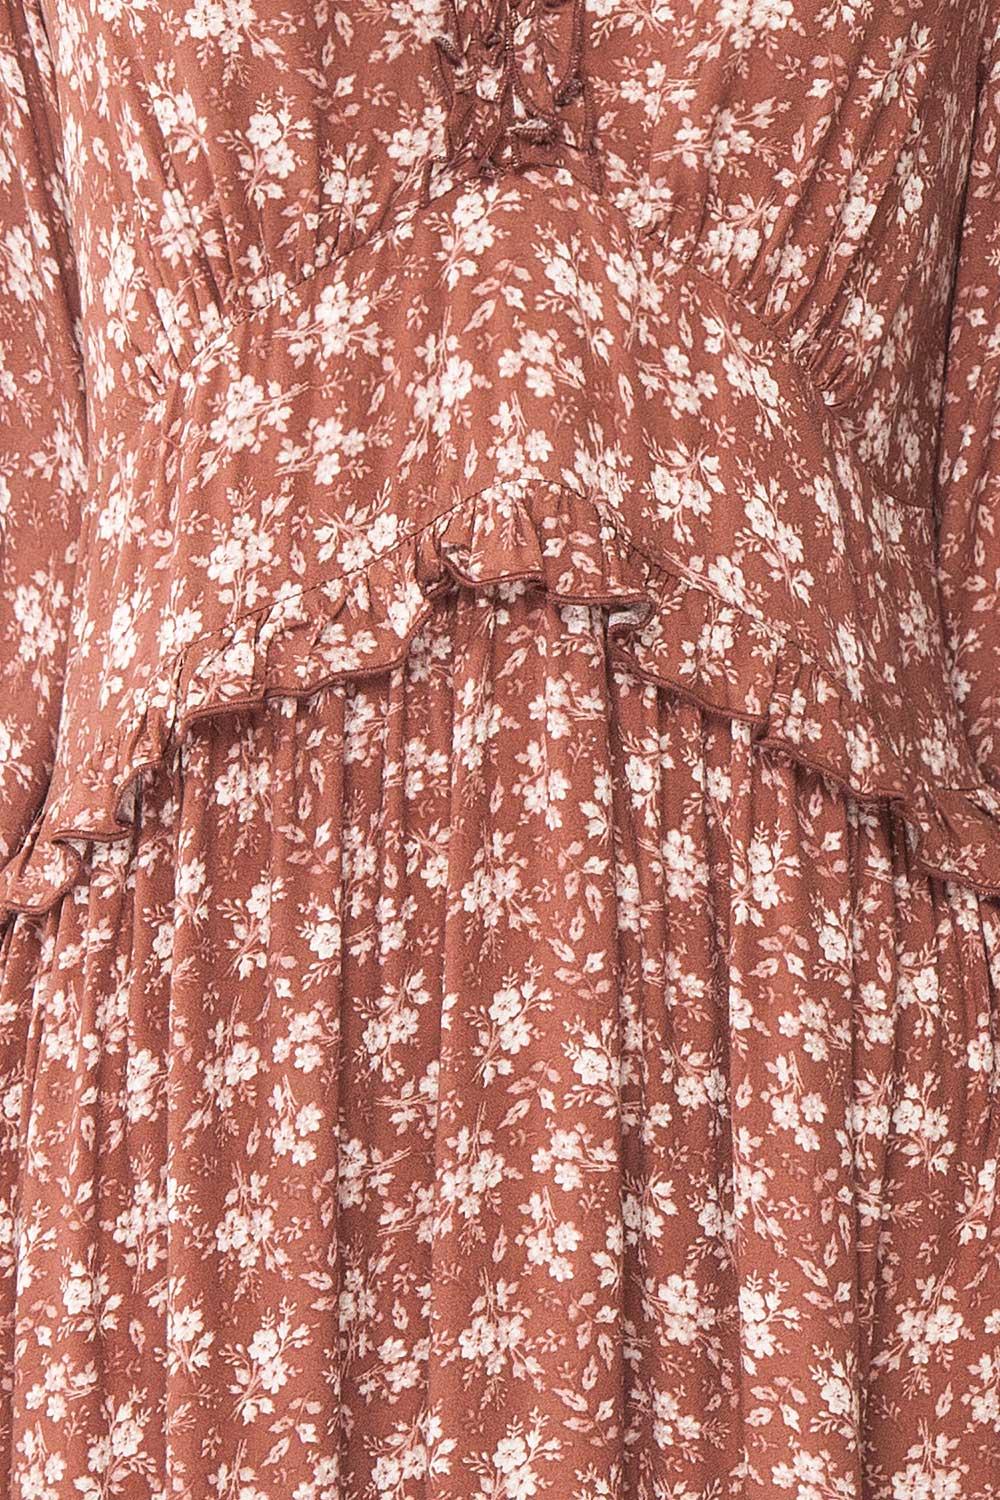 Aimetine Dusty Rose Long Sleeve Floral Dress | Boutique 1861 fabric